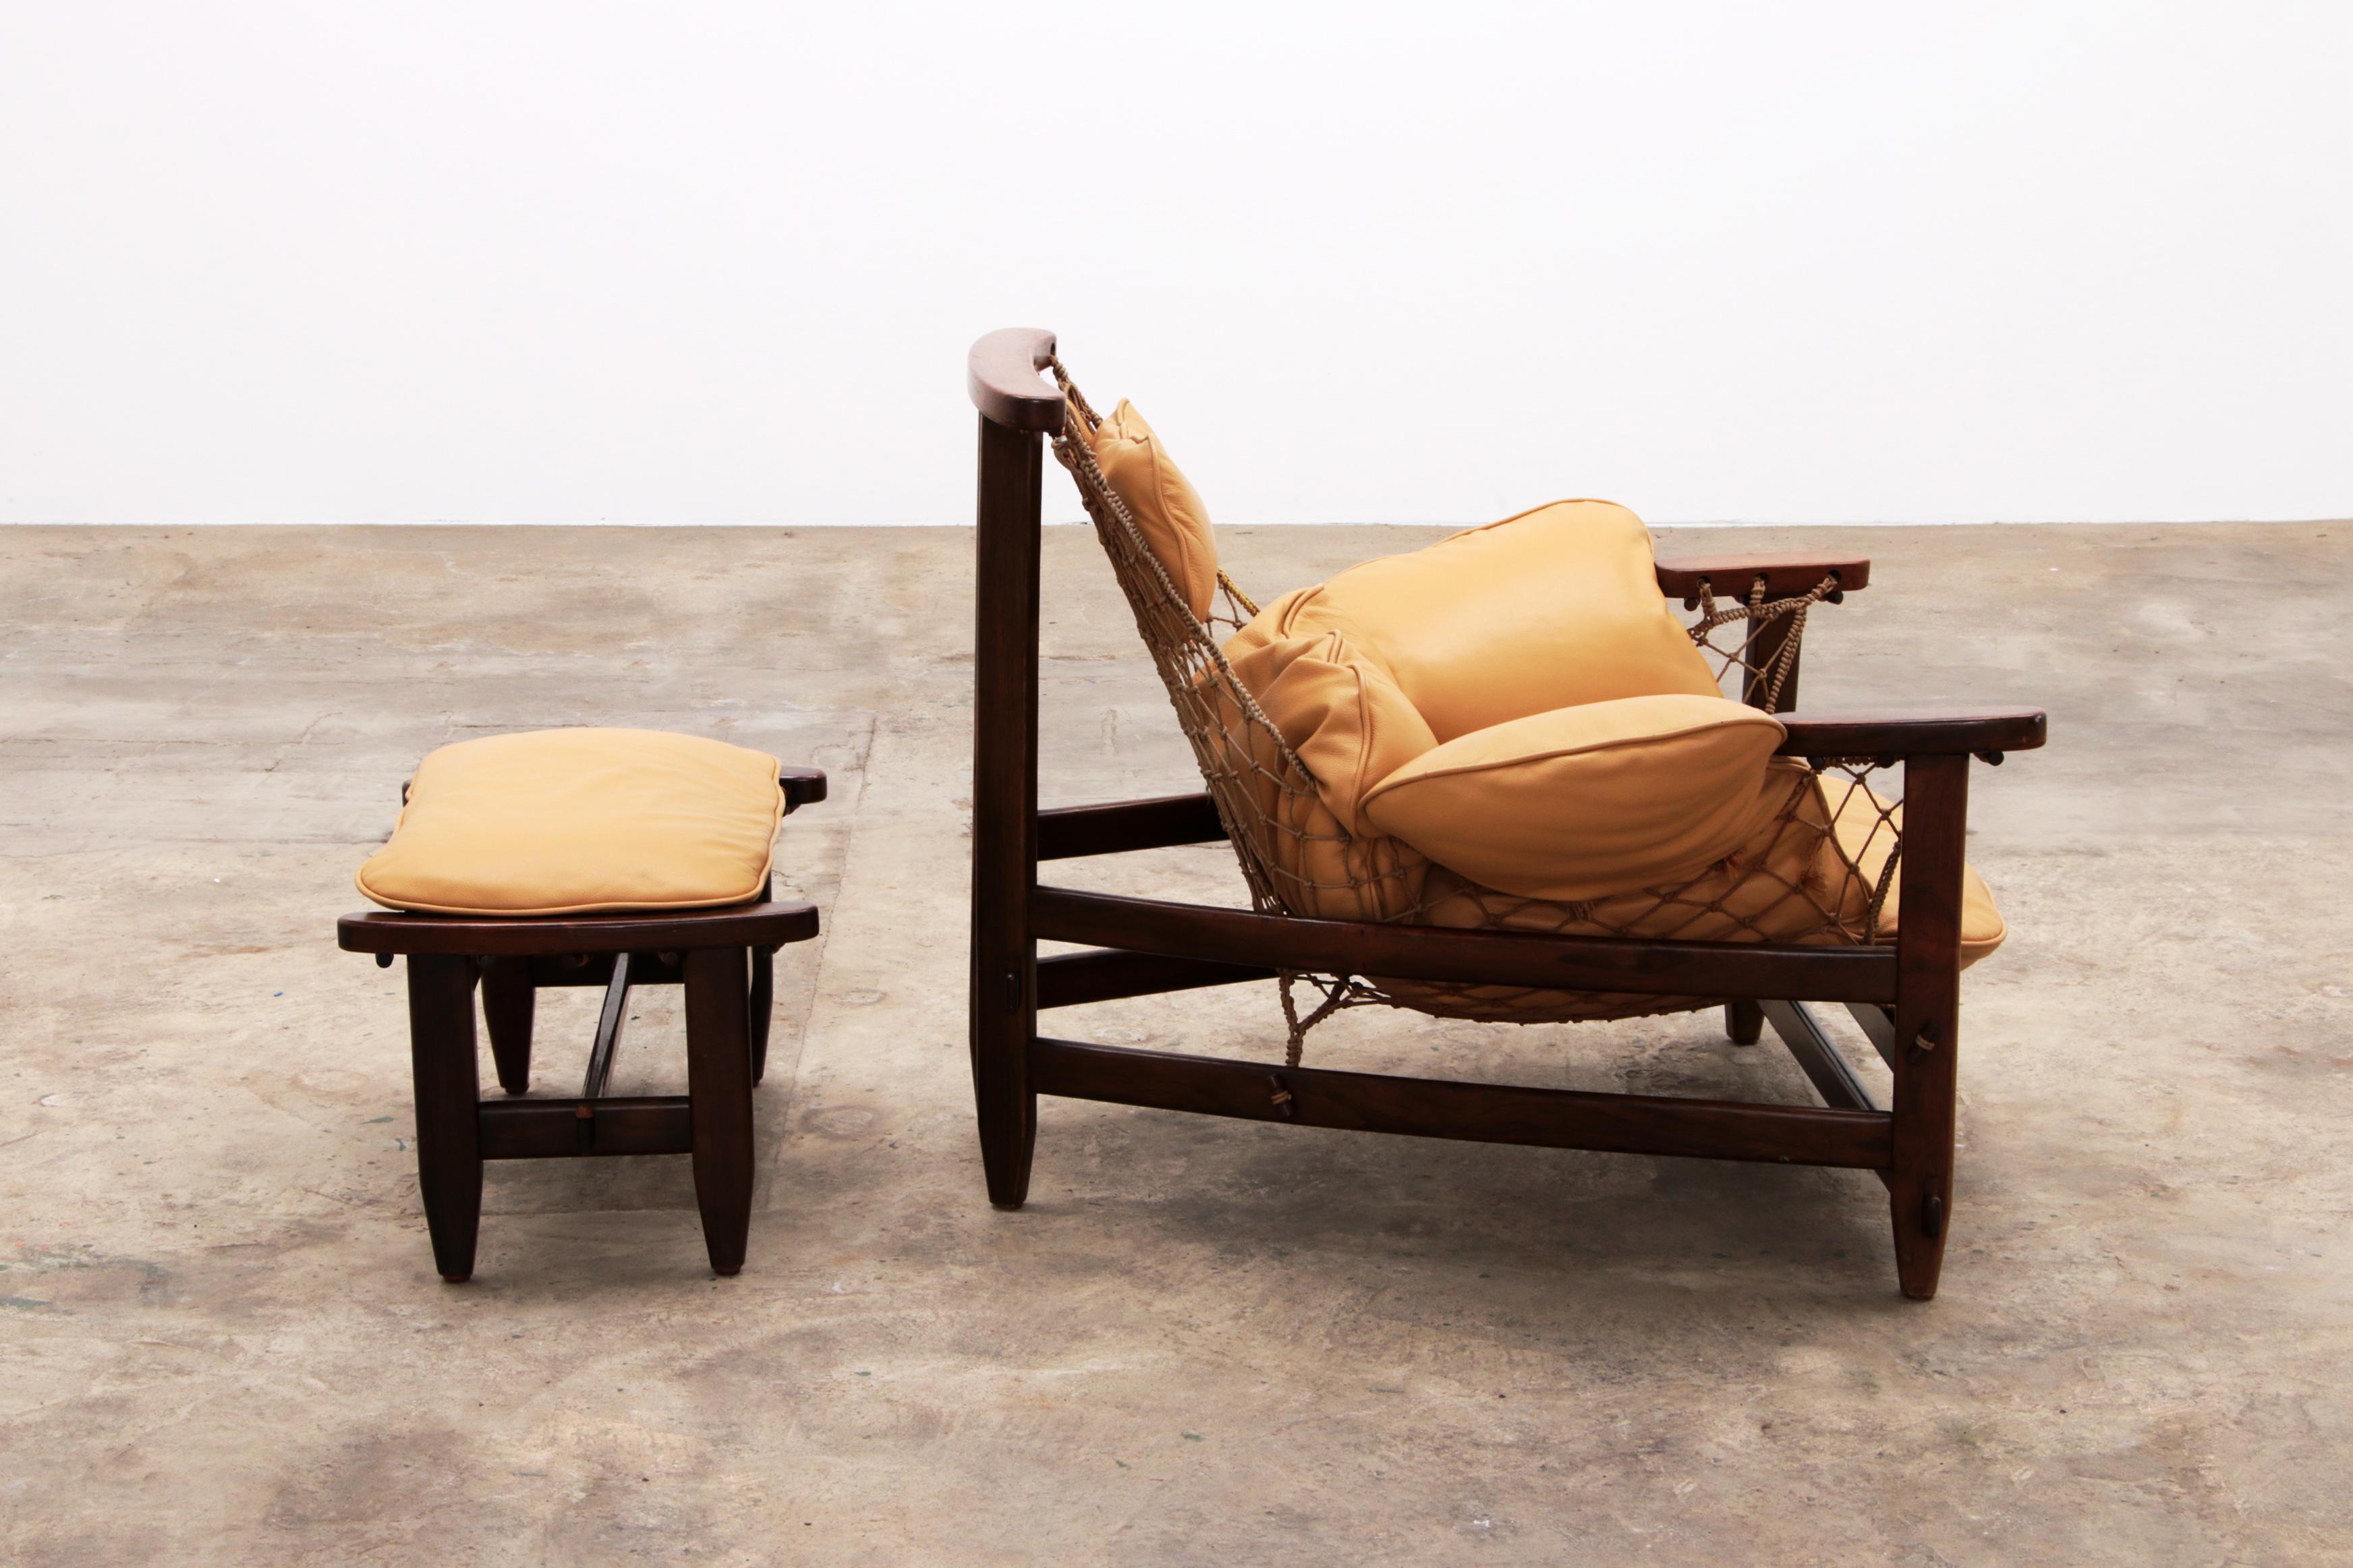 Leather Jean Gillon 'Jangada' lounge chair and ottoman in tropical wood and leather.